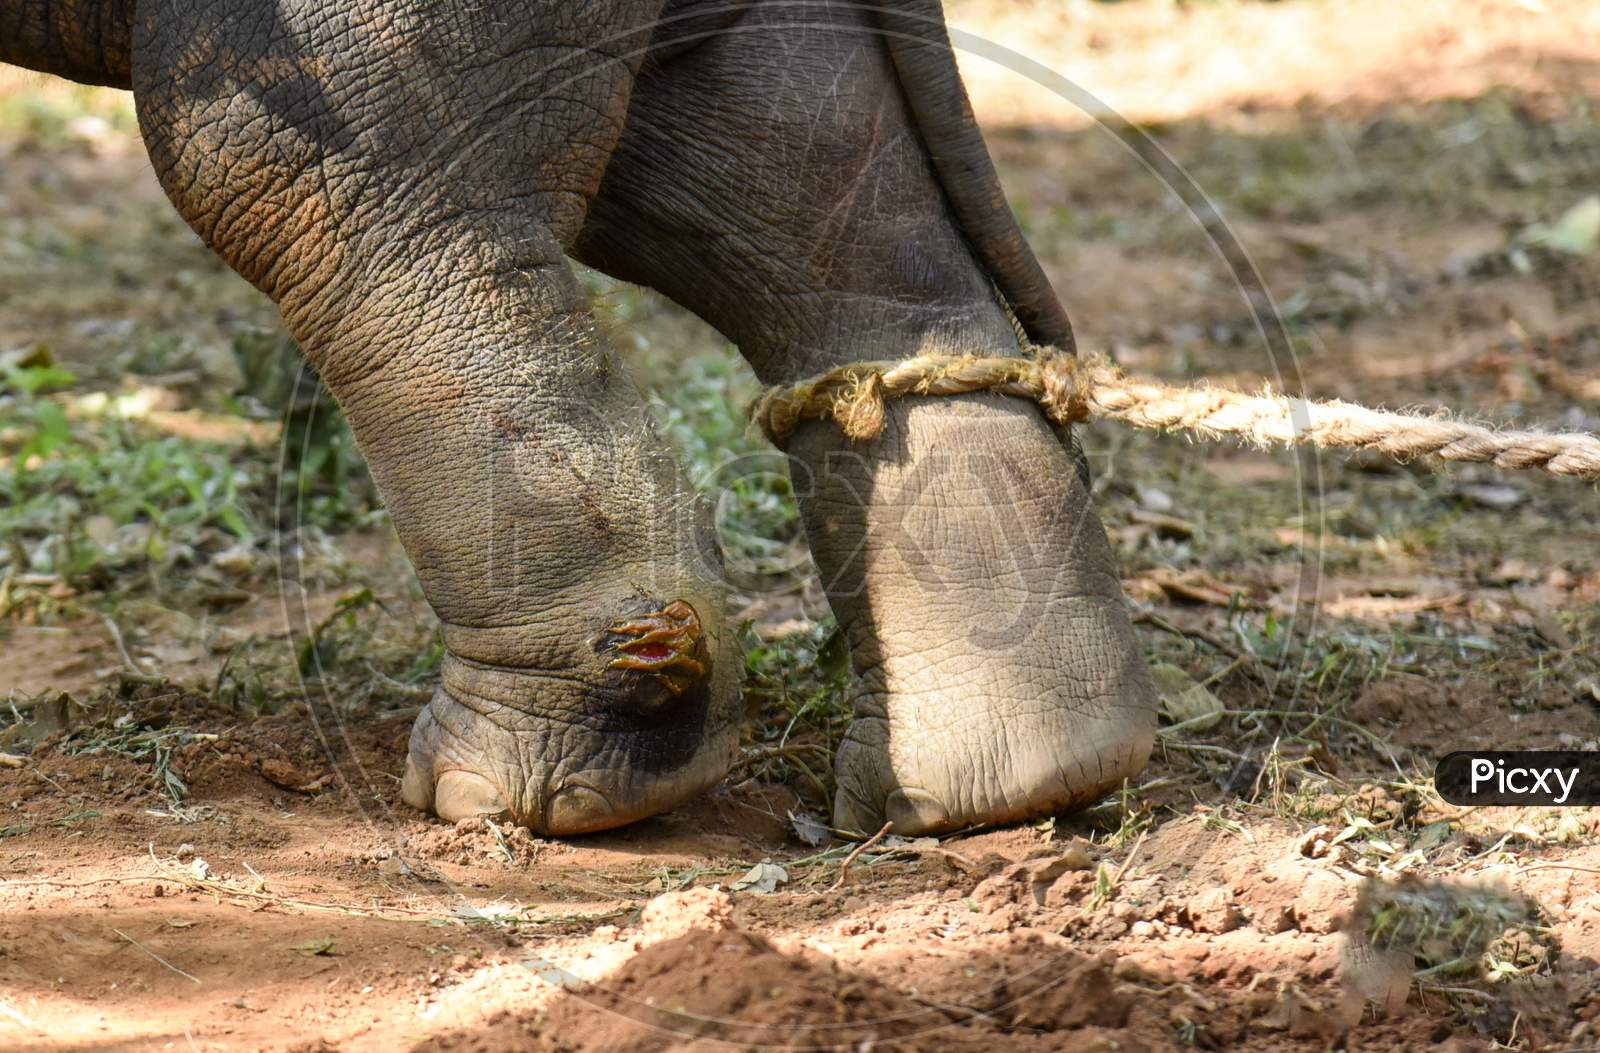 Baby elephant rescued from water tank receives care at local zoo